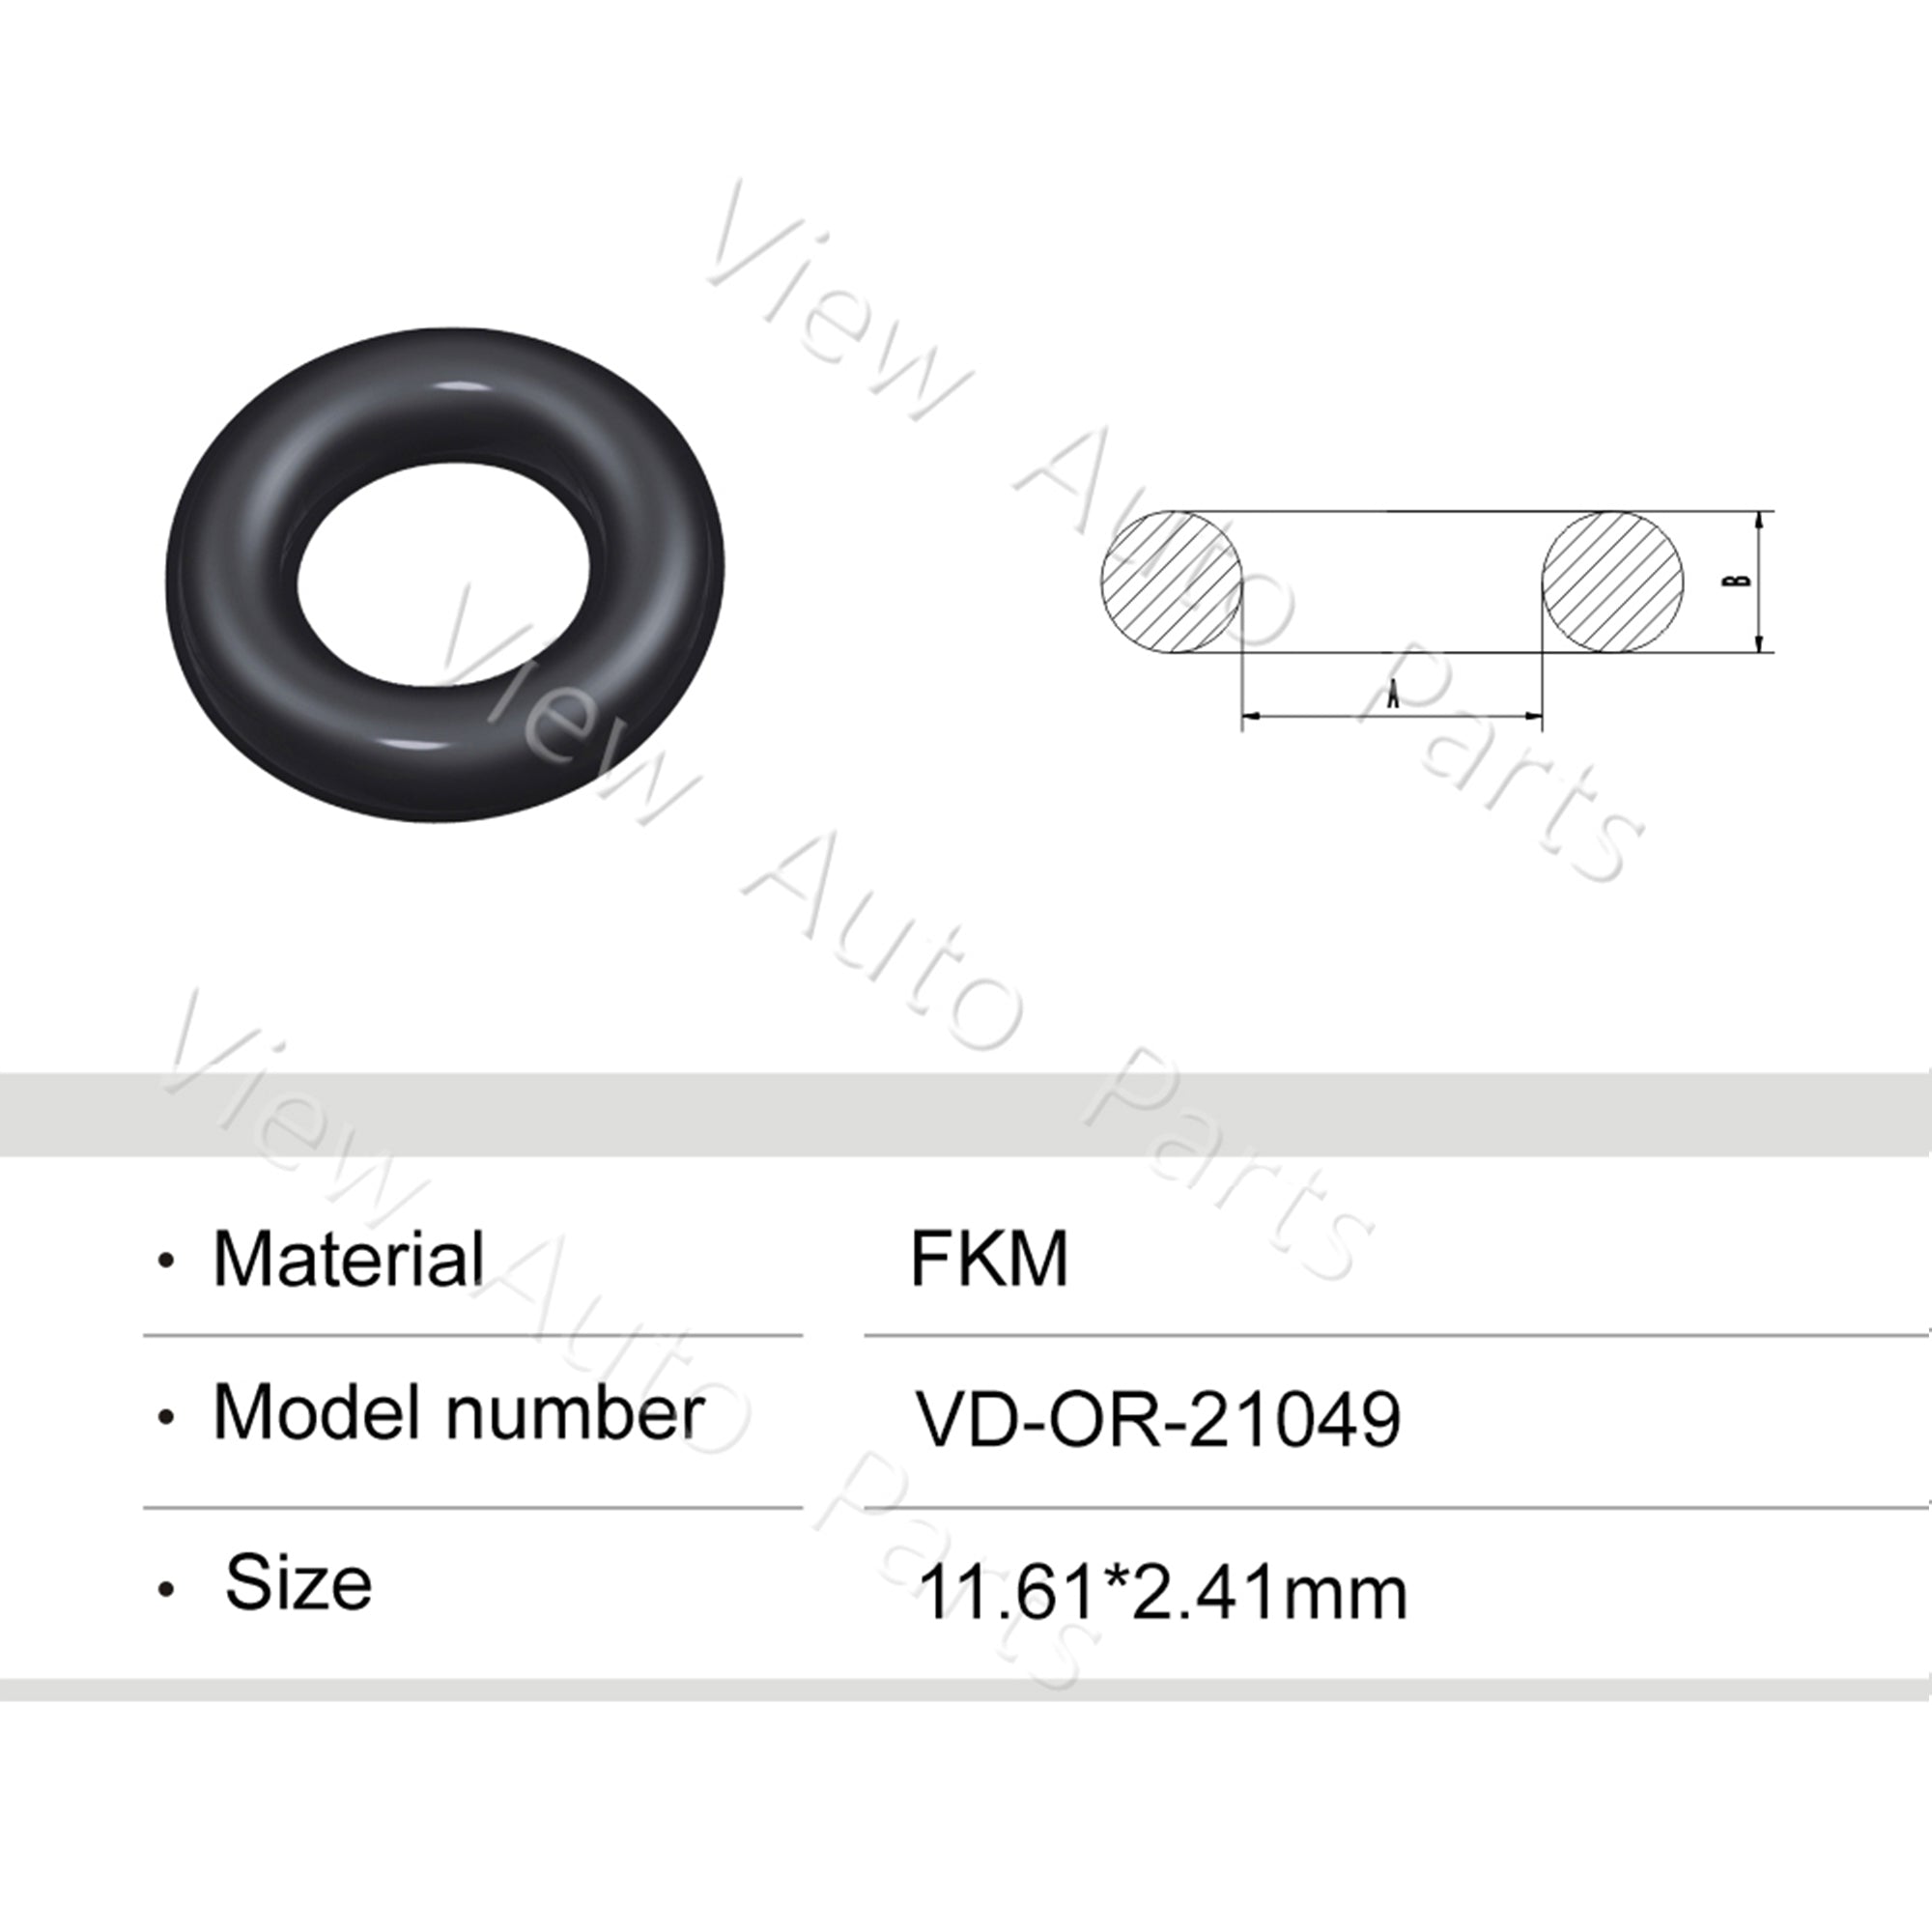 Fuel Injector Rubber Seal Orings for Fuel Injector Repair Kits FKM & Rubber Heat Resistant, Size: 11.61*2.41mm OR-21049